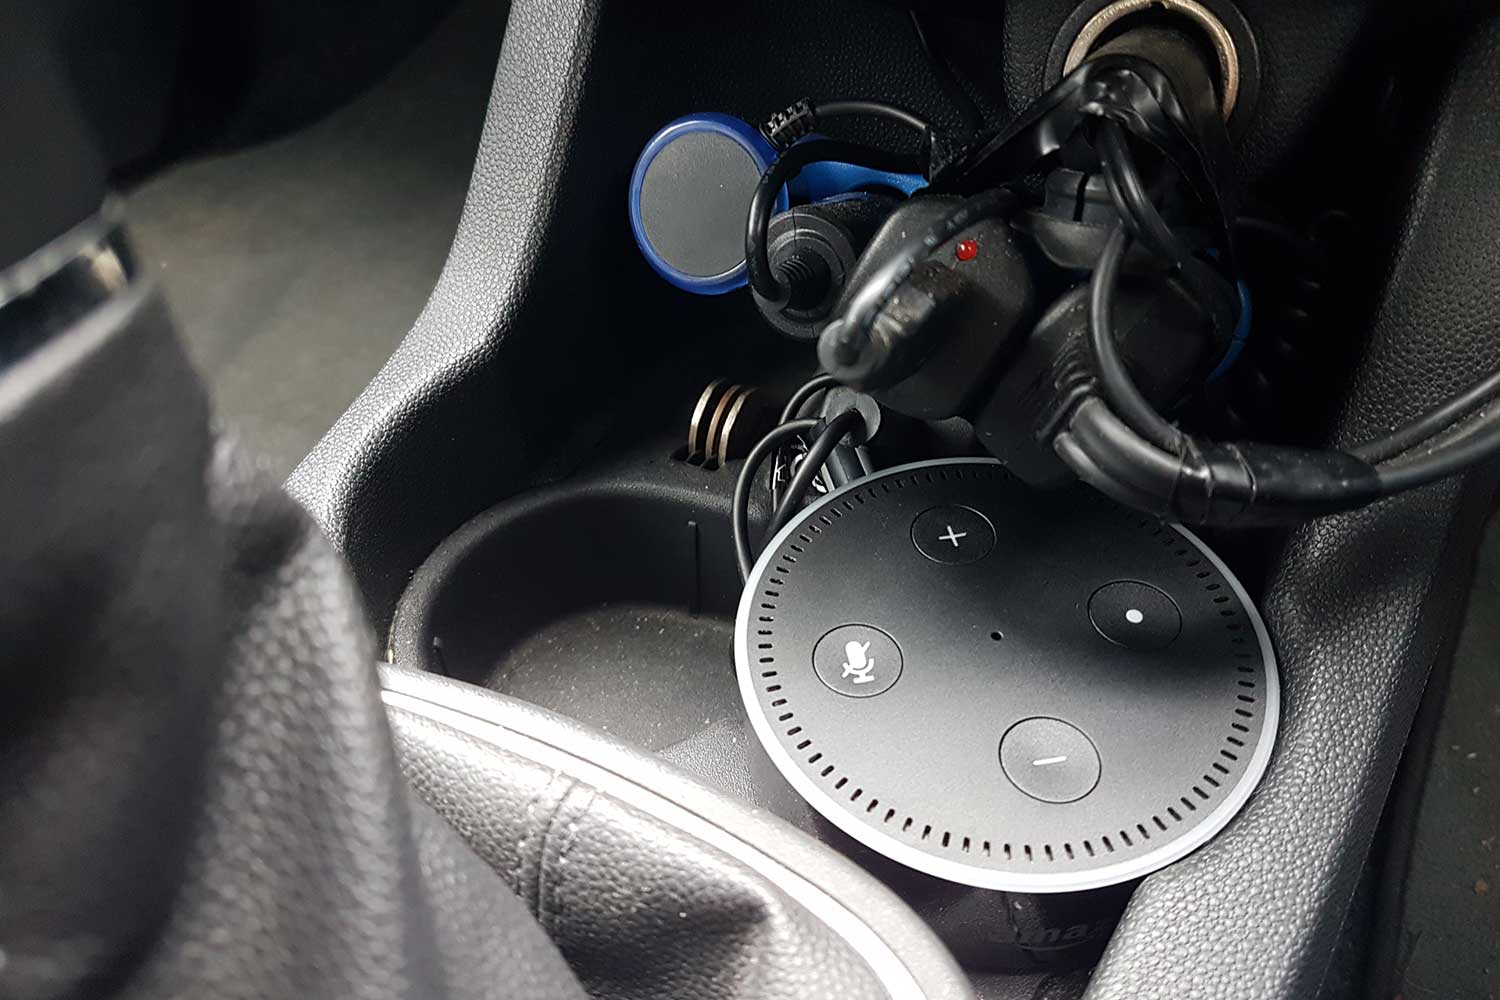 Echo Dot in car cup holder